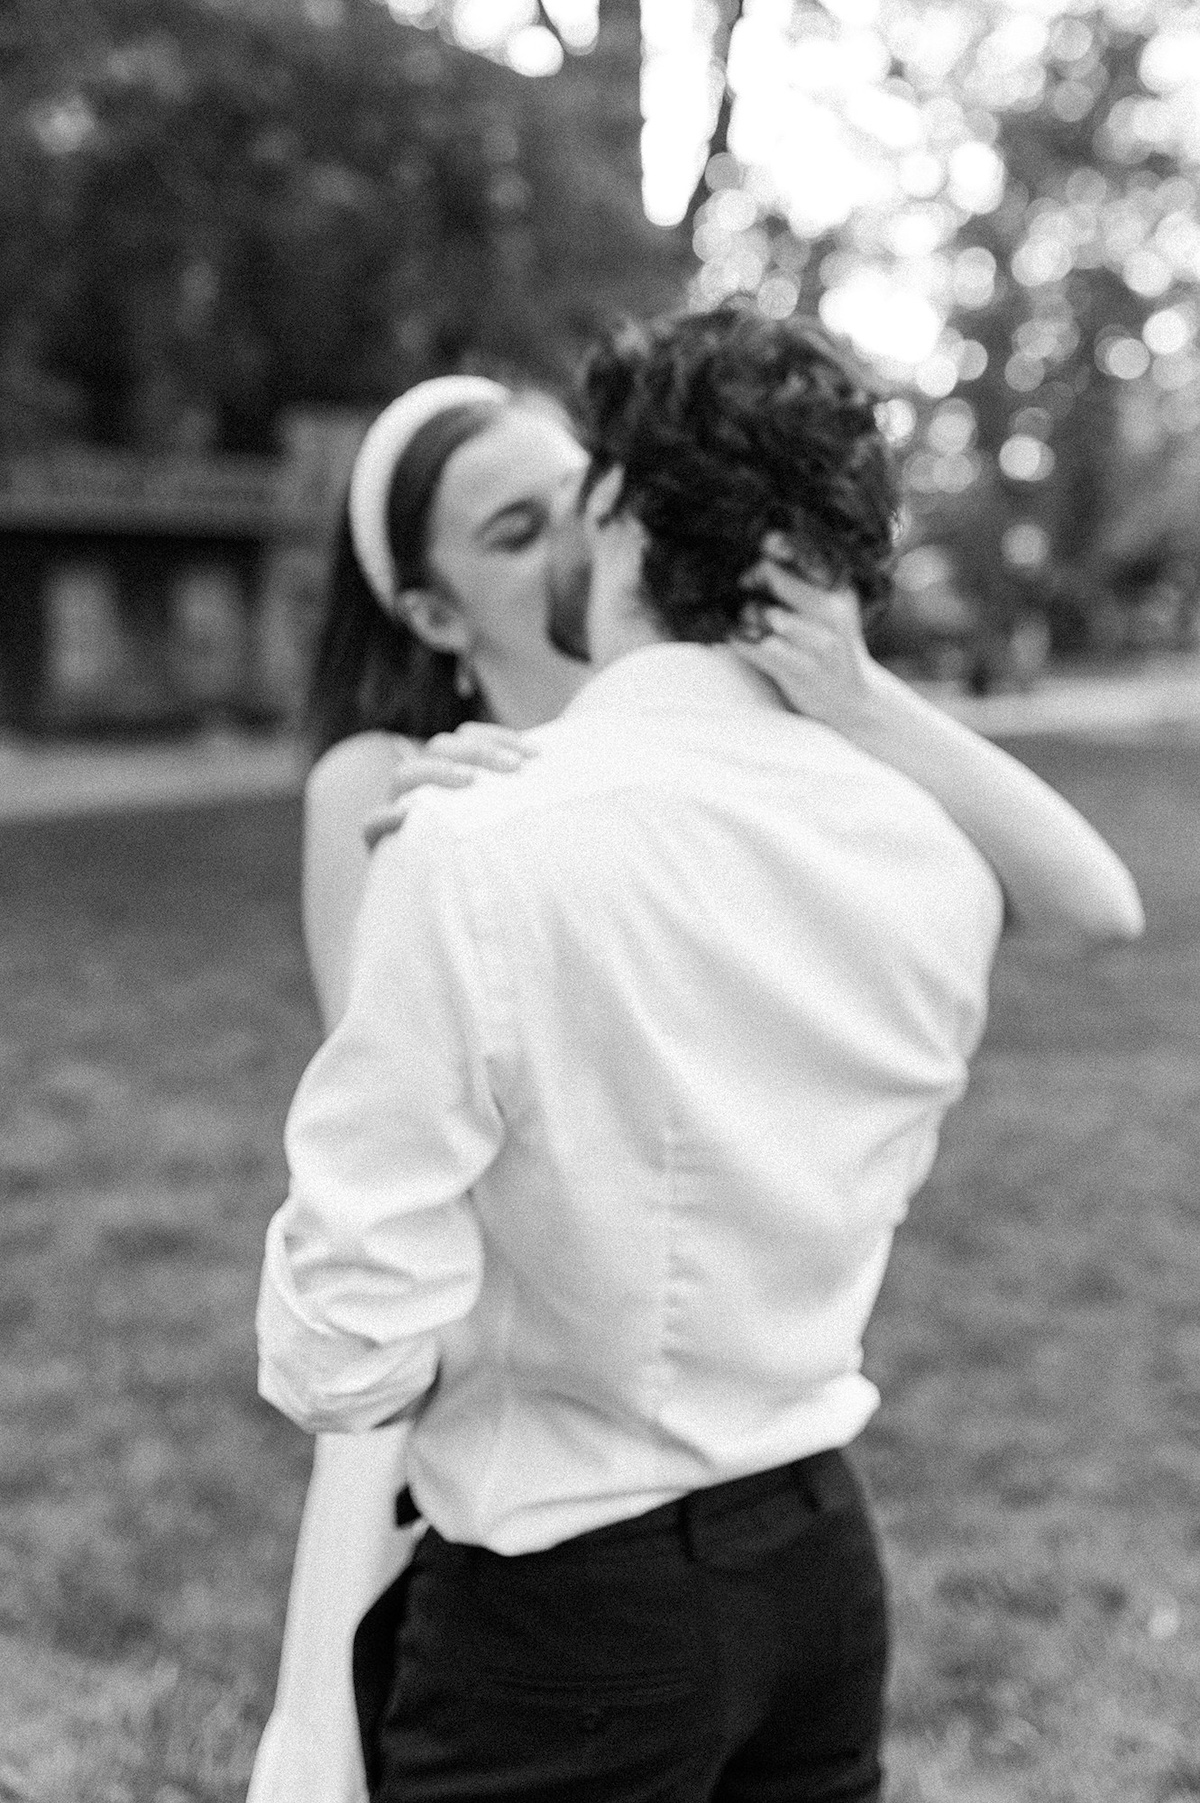 Intimate embrace framed by Princeton University's picturesque surroundings.